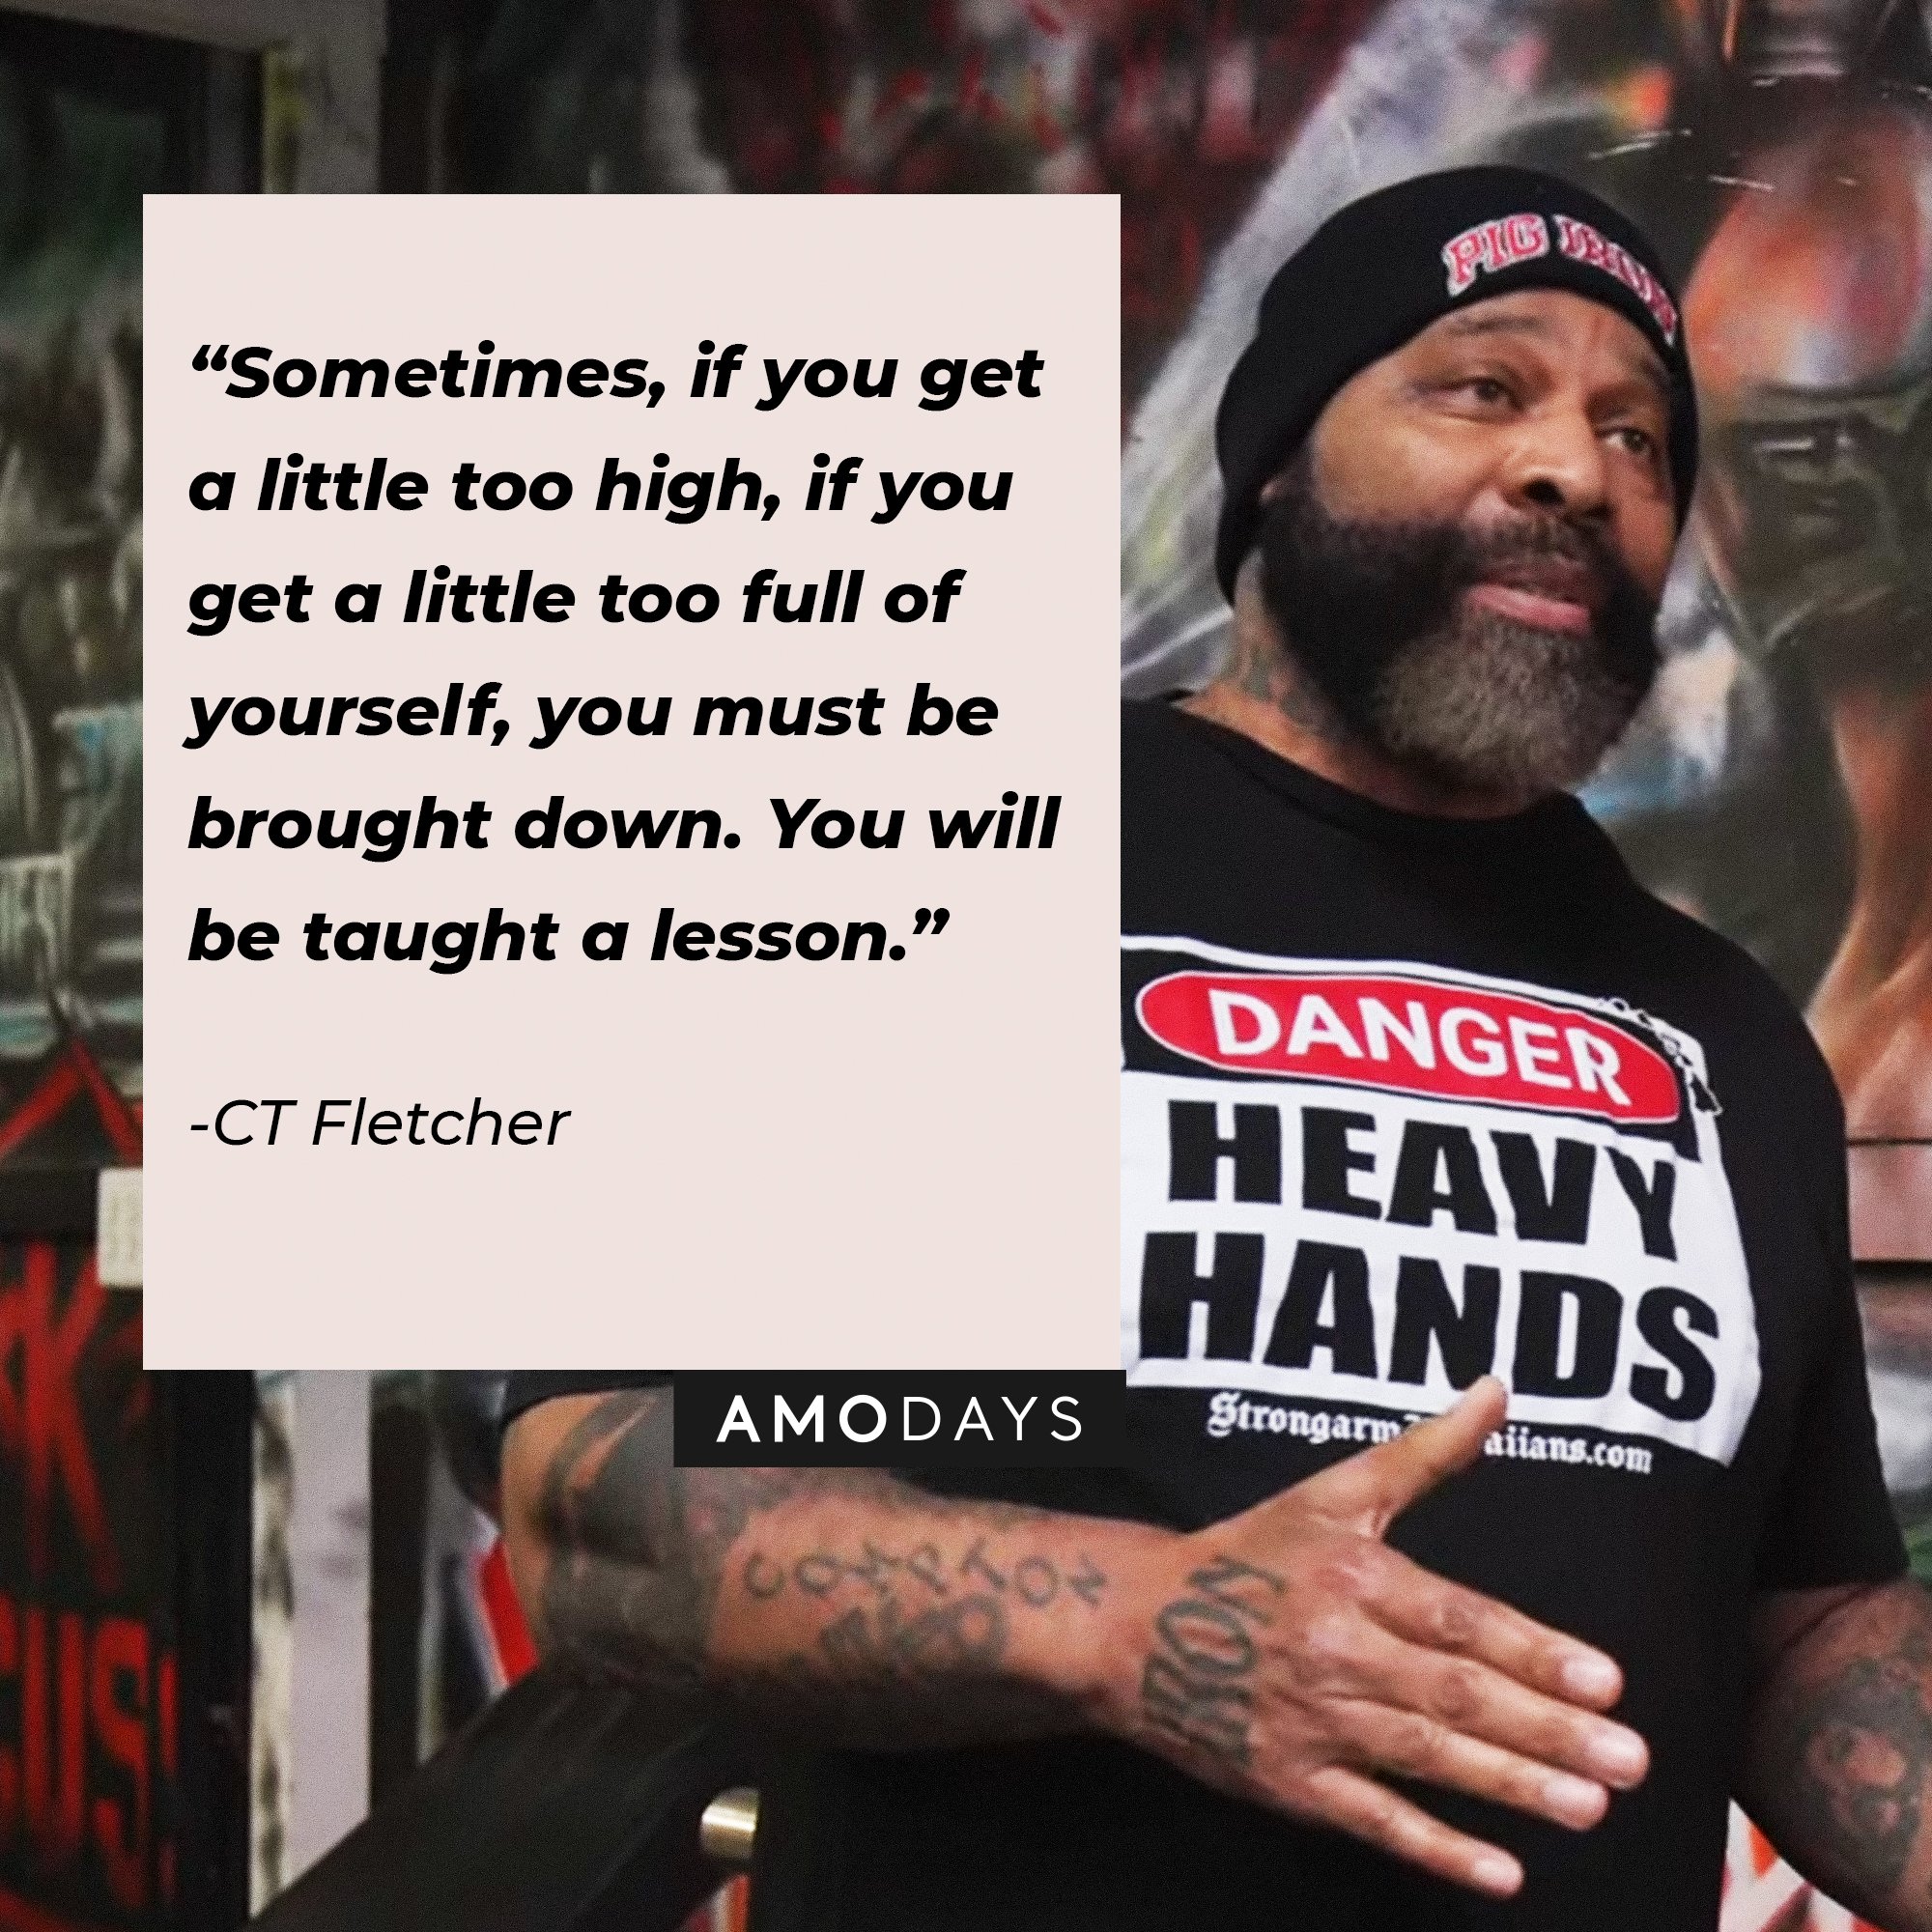 CT Fletcher's quote:\\\\\\\\u00a0"Sometimes, if you get a little too high, if you get a little too full of yourself, you must be brought down. You will be taught a lesson."\\\\\\\\u00a0| Image: AmoDays